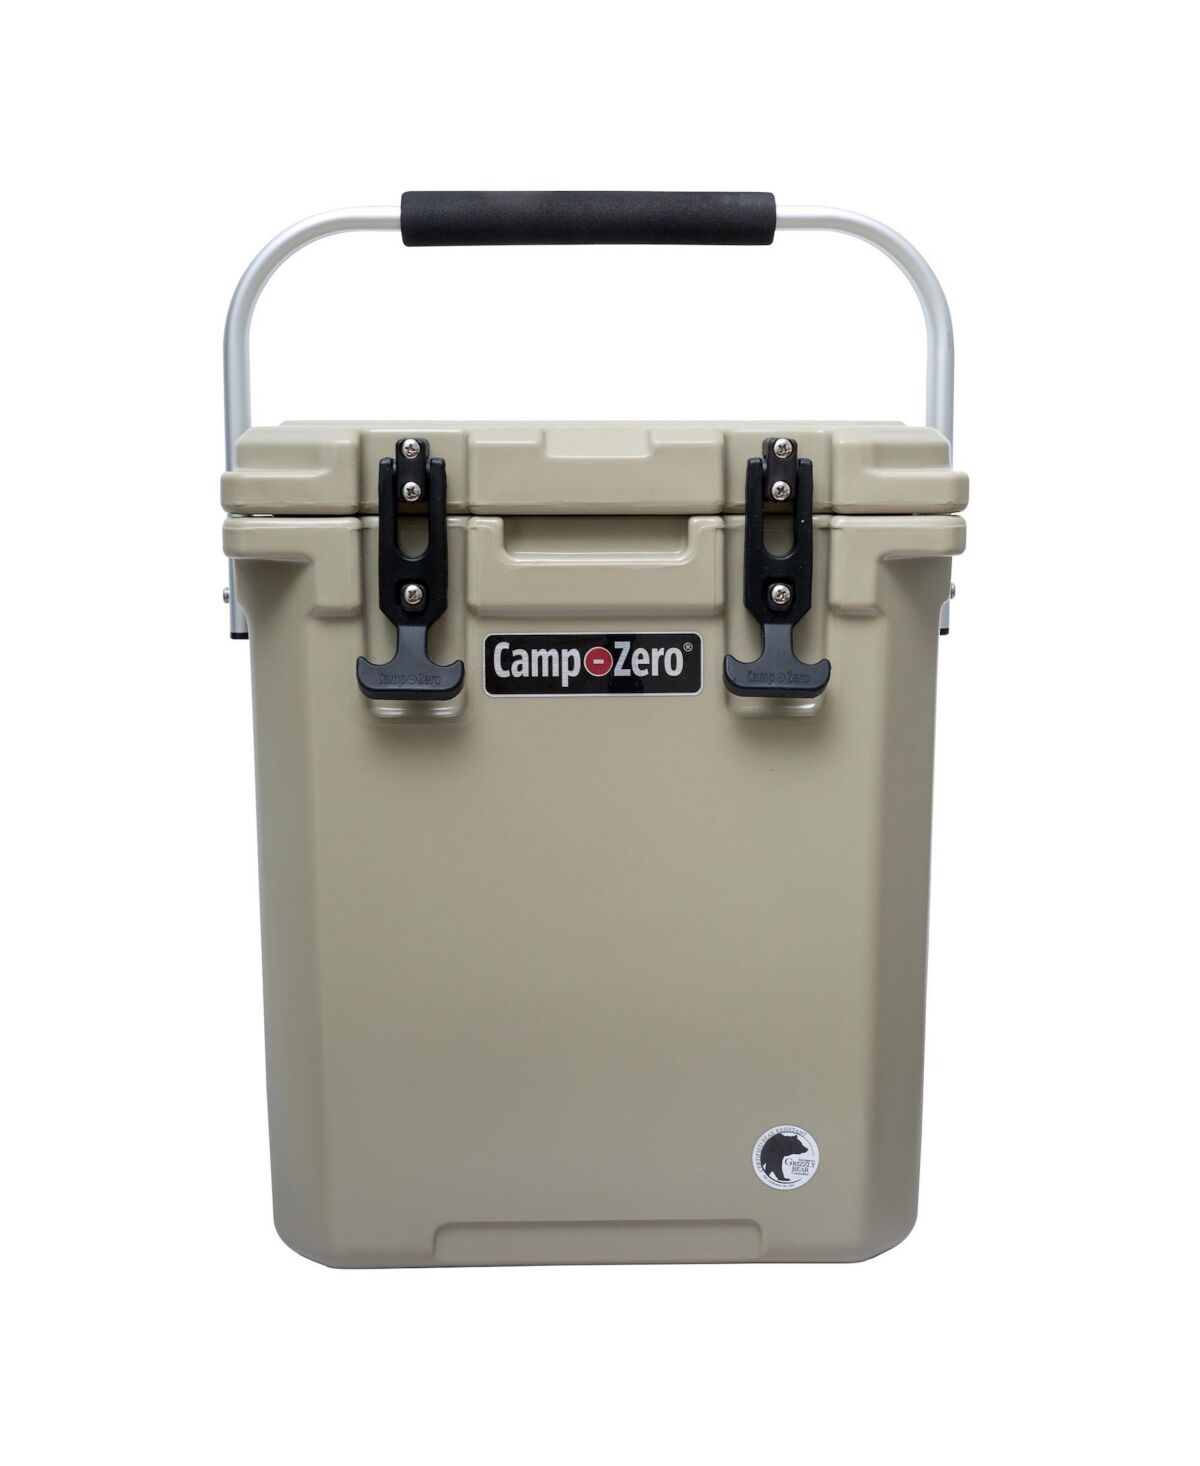 Camp-zero 16 Tall   16.9 Qt. Premium Cooler with 2 Molded-In Cup Holders and Folding Aluminum Comfort Grip Handle   Sky Blue - Beige